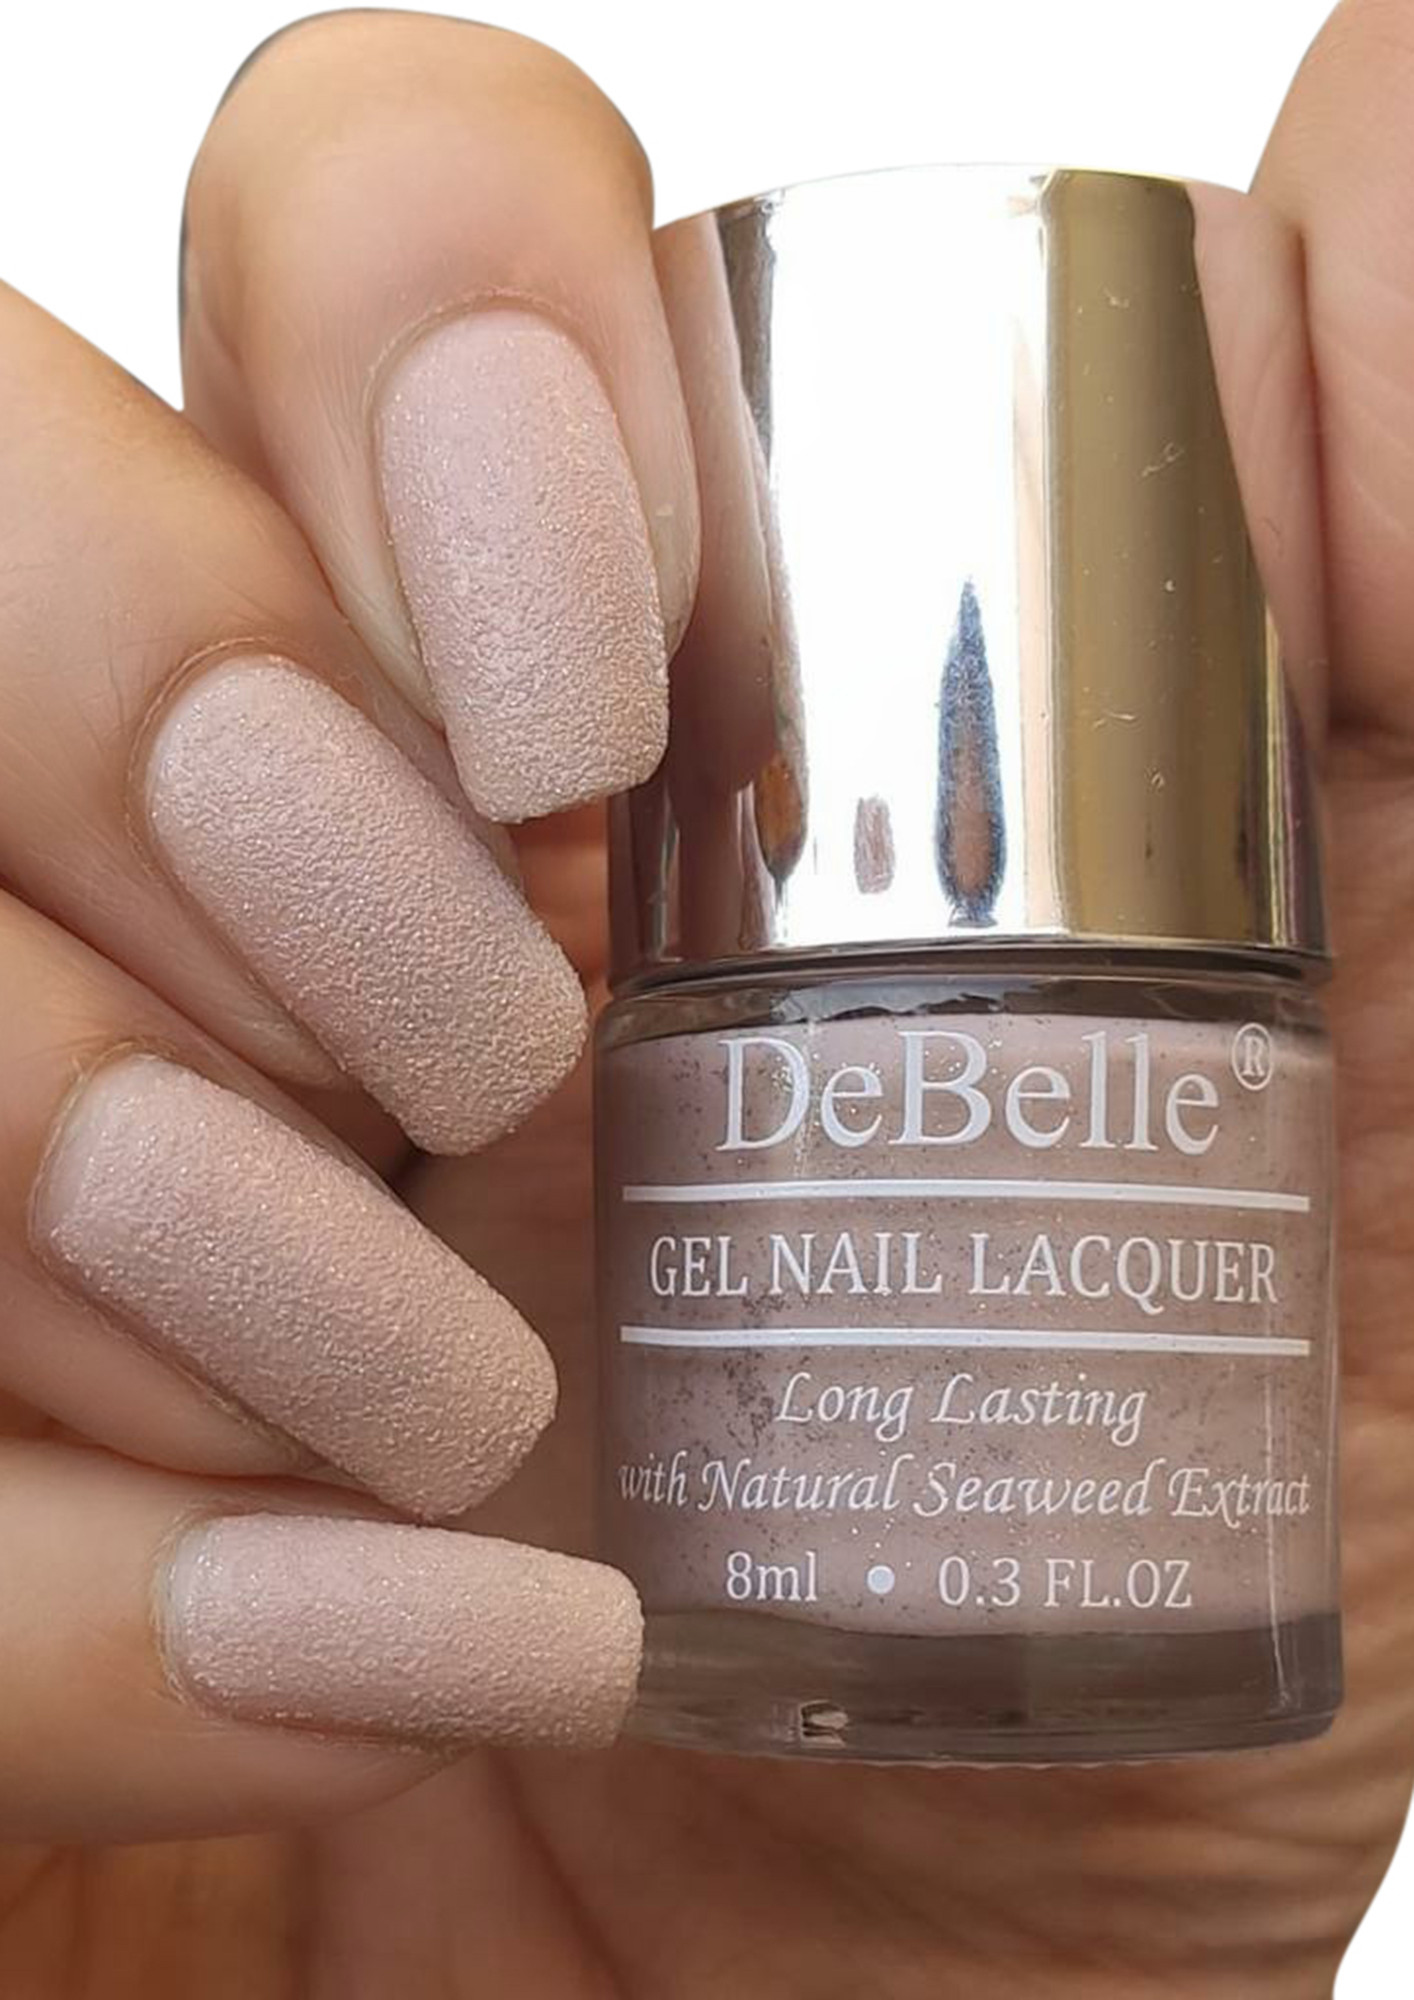 Buy Nykaa Star Studded Glitter Coat Nail Enamel - 225 Boujee Rose Gold  (9ml) Online at Low Prices in India - Amazon.in